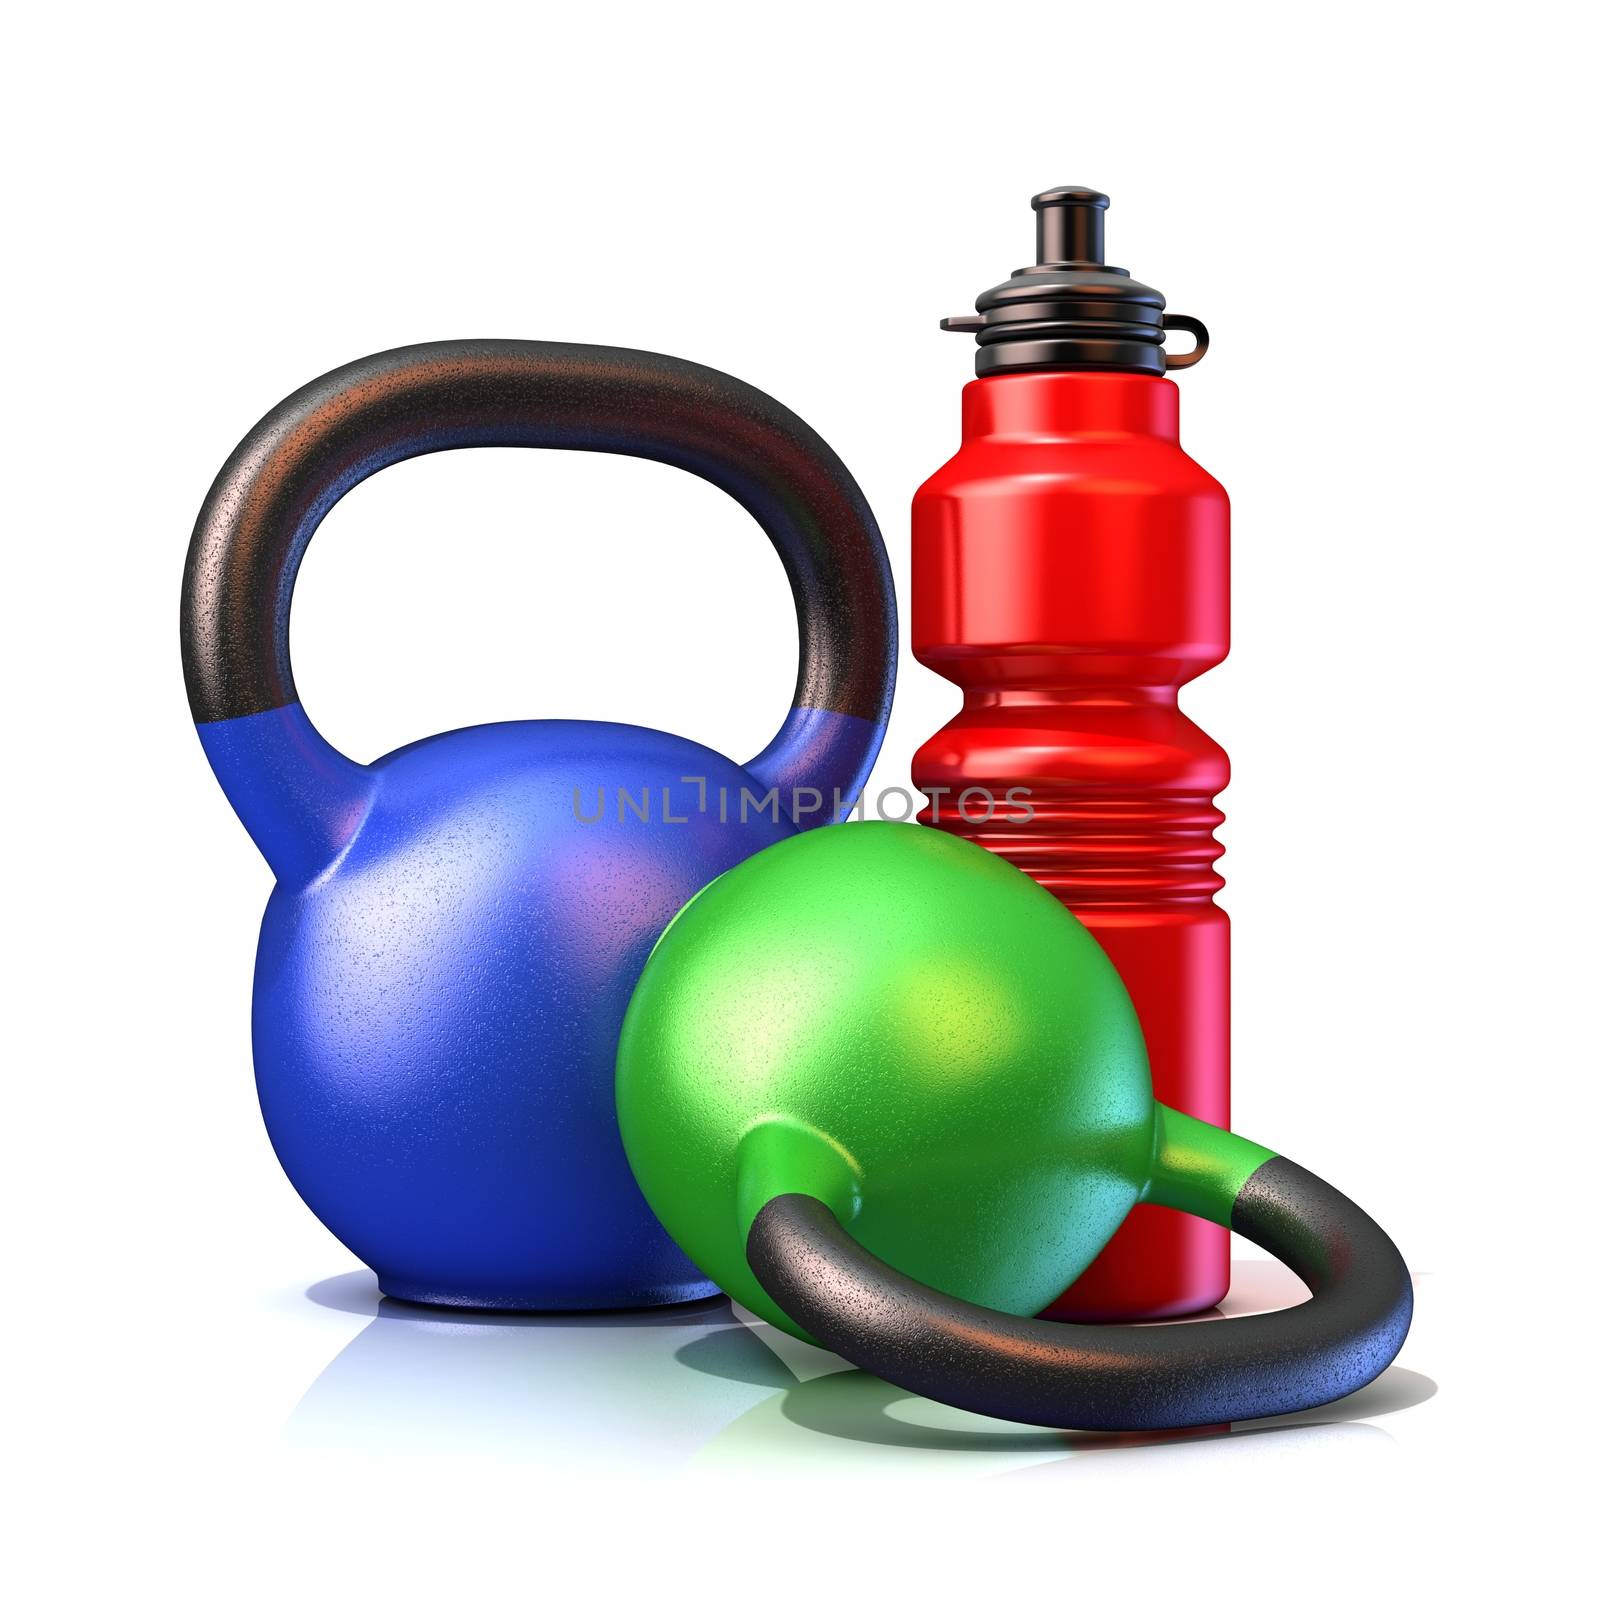 Red plastic sport bottles and kettle bells weight, isolated on a white background. 3D render illustration.